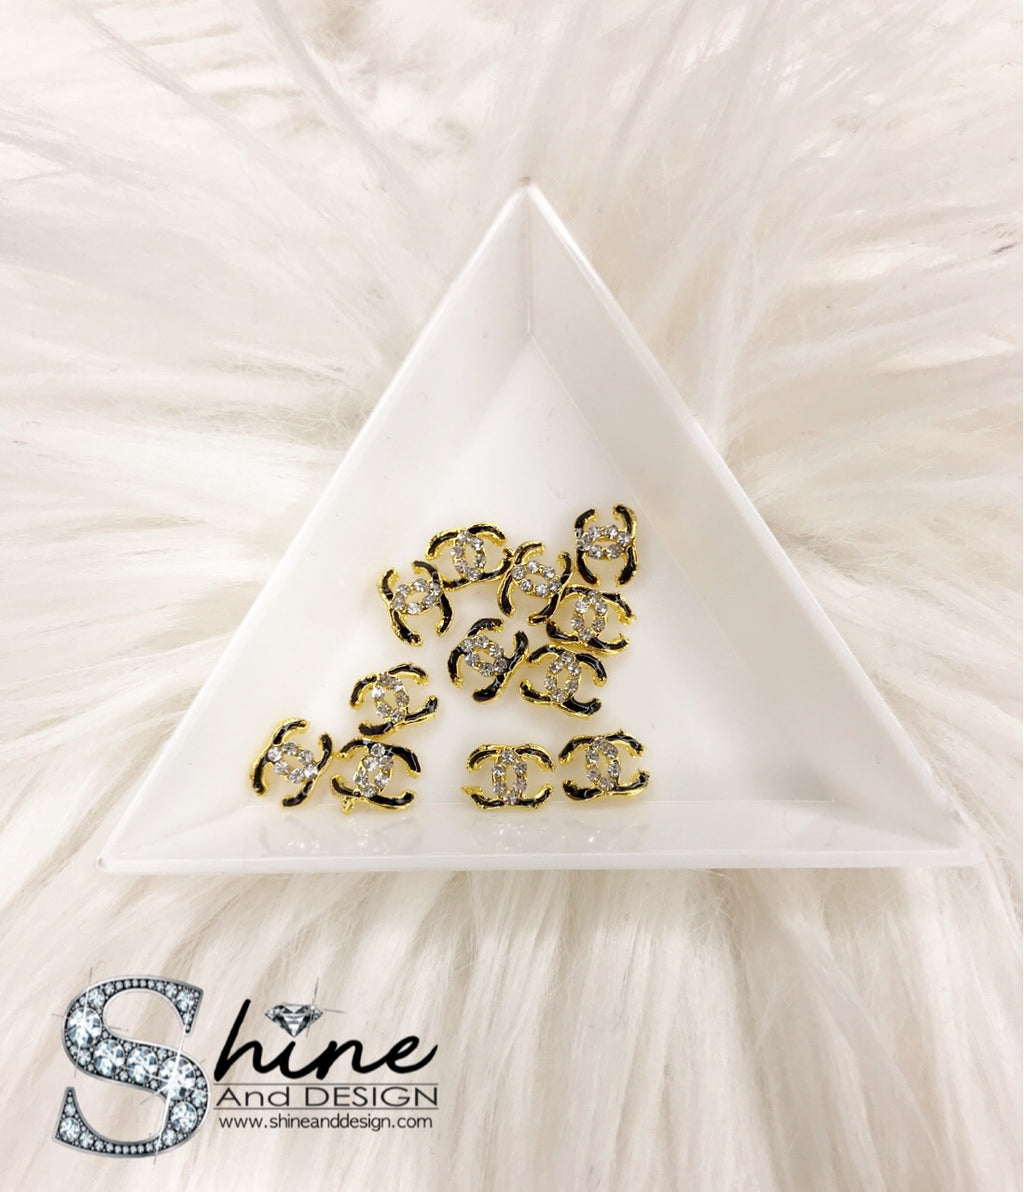 Shine Metal Alloy Charms with Crystals